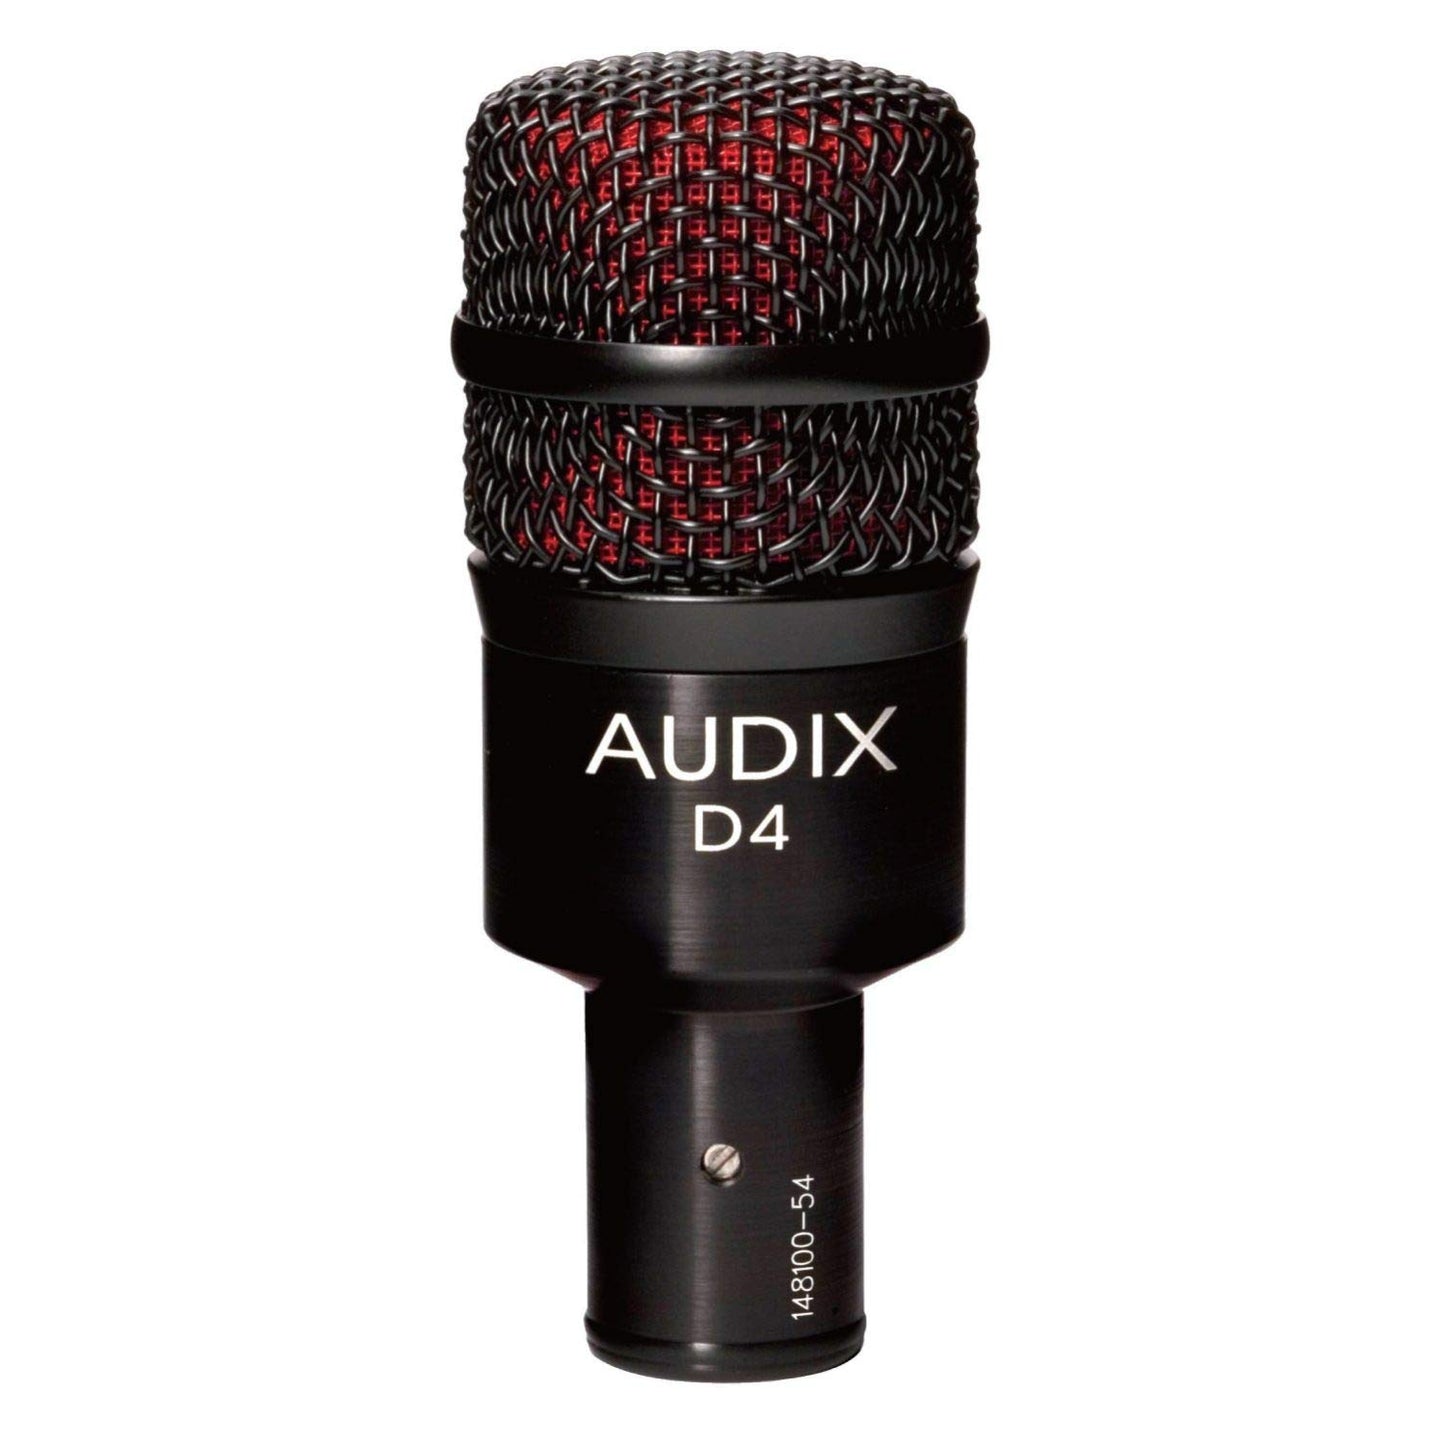 Audix DP5A - Complete Drum Microphone Package